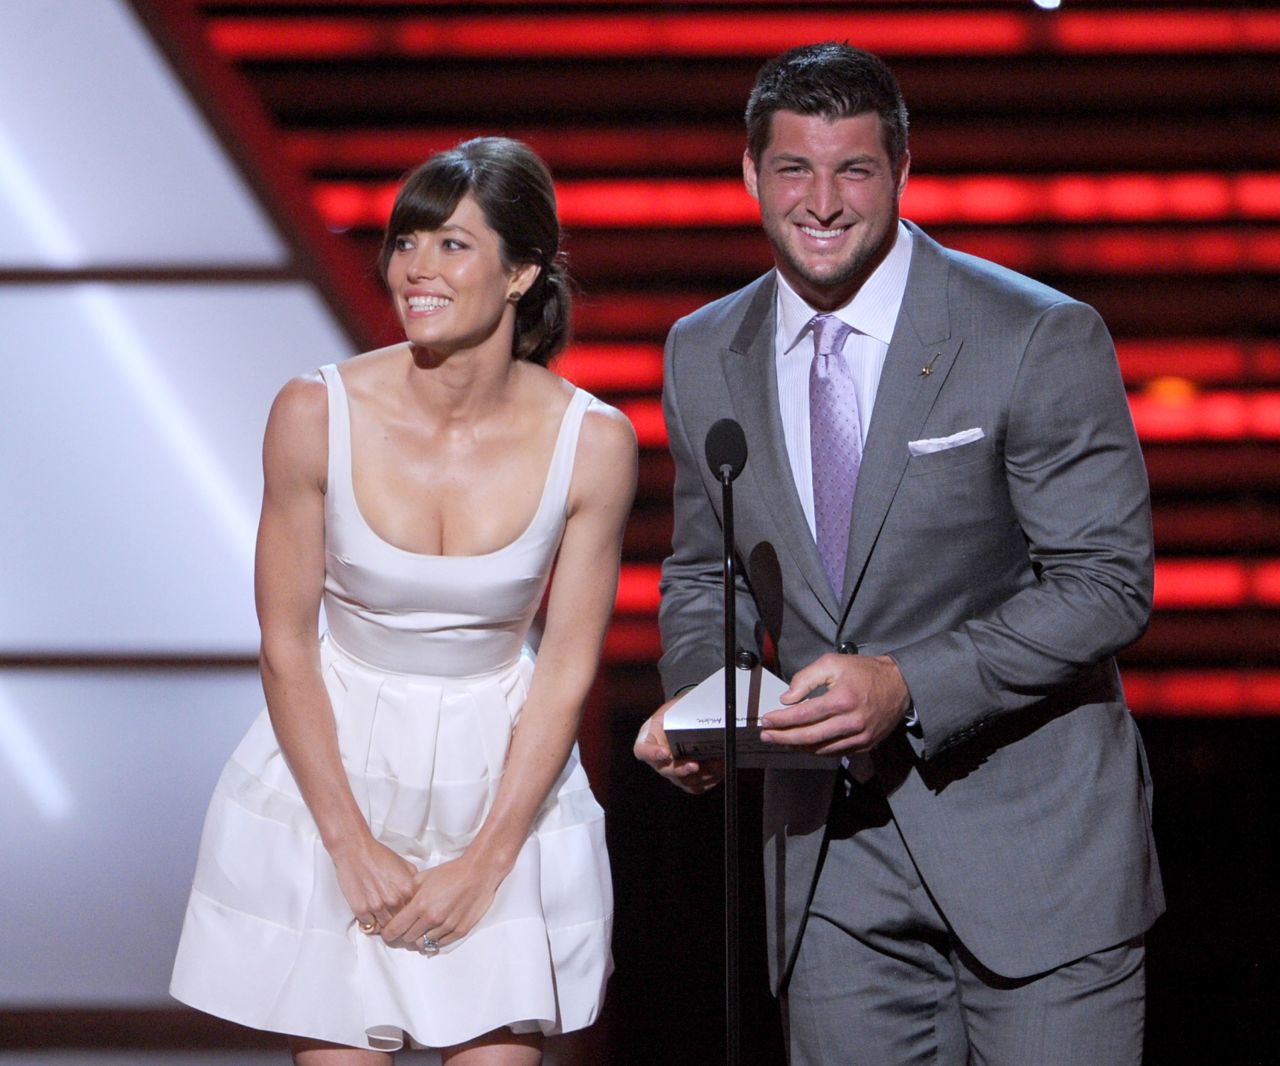 Tebow and actress Jessica Biel present an award during the 2012 ESPYs in Los Angeles. 